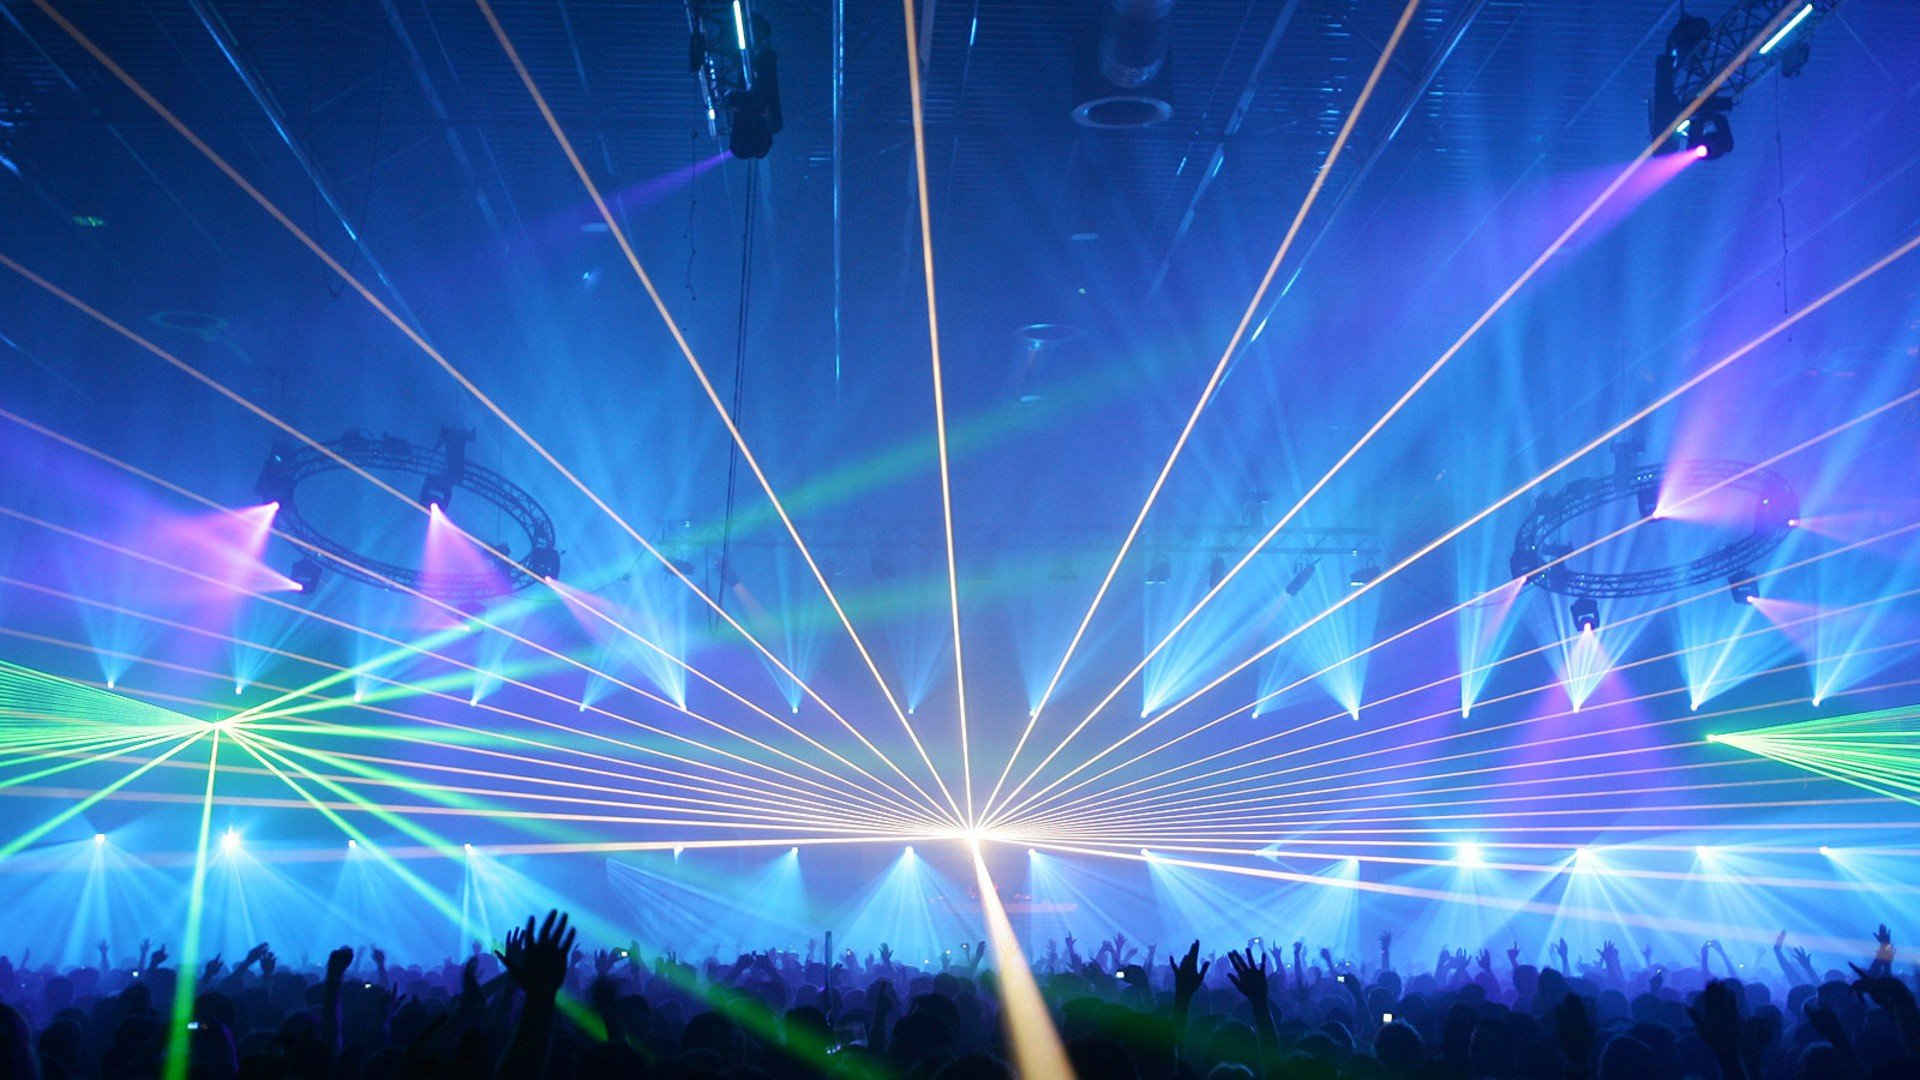 1920x1080 Wallpaper : px, lights, music festival CoolWallpapers 1193403 HD Wallpapers